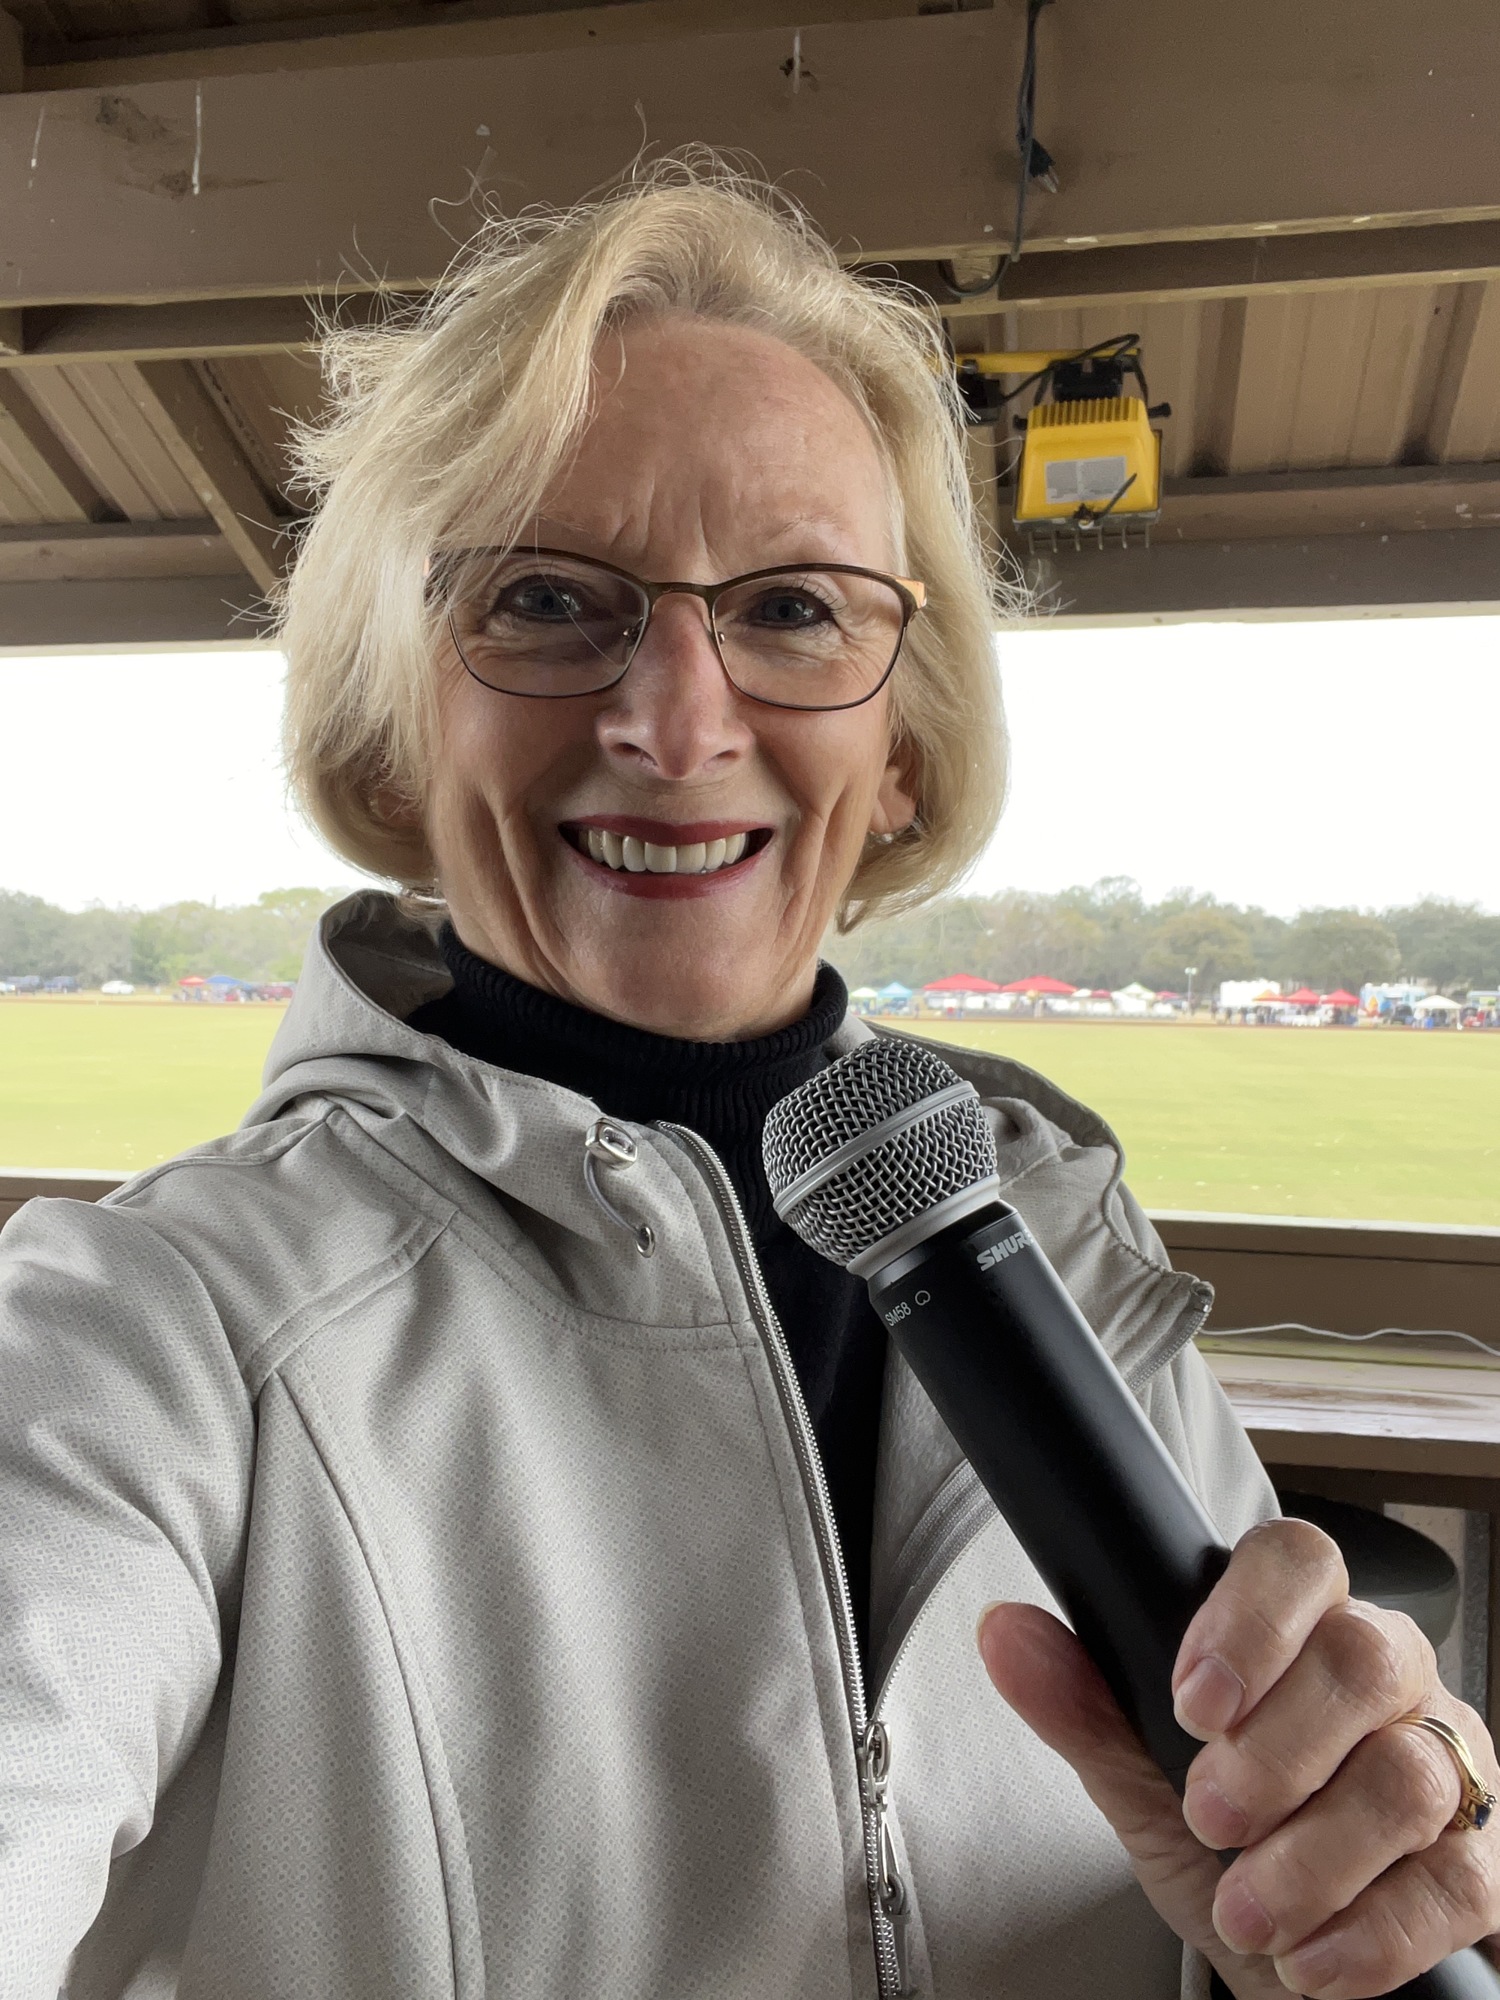 Lakewood Ranch's Sabine Kvenberg prepares to sing the national anthem at the Sarasota Polo Club. Courtesy photo.